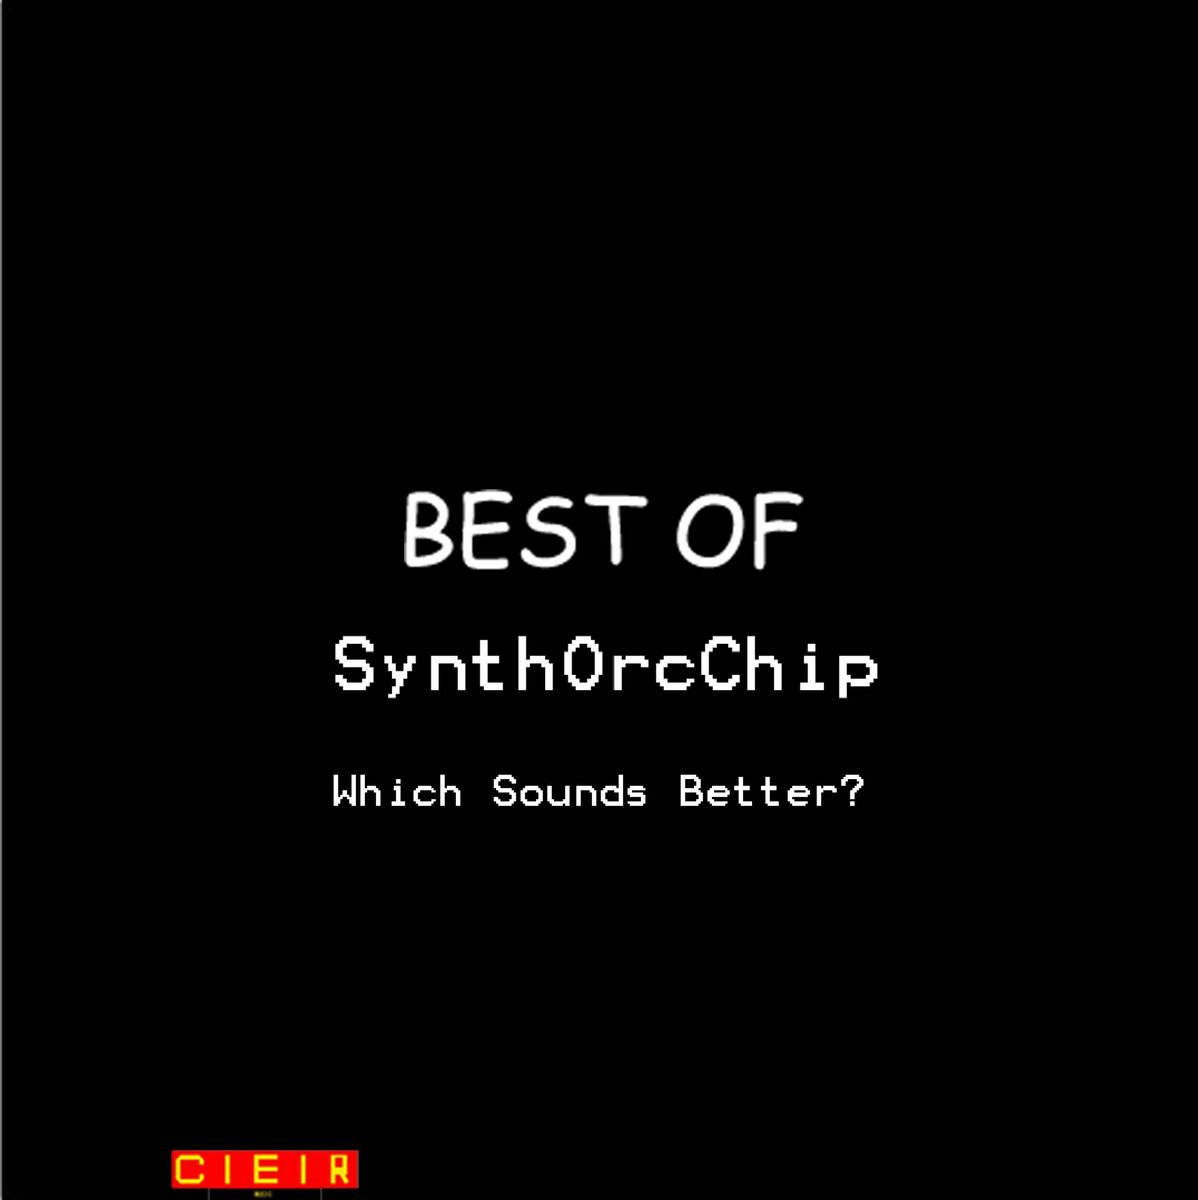 https://shanethemusician.bandcamp.com/album/best-of-synthorcchip-which-sounds-better